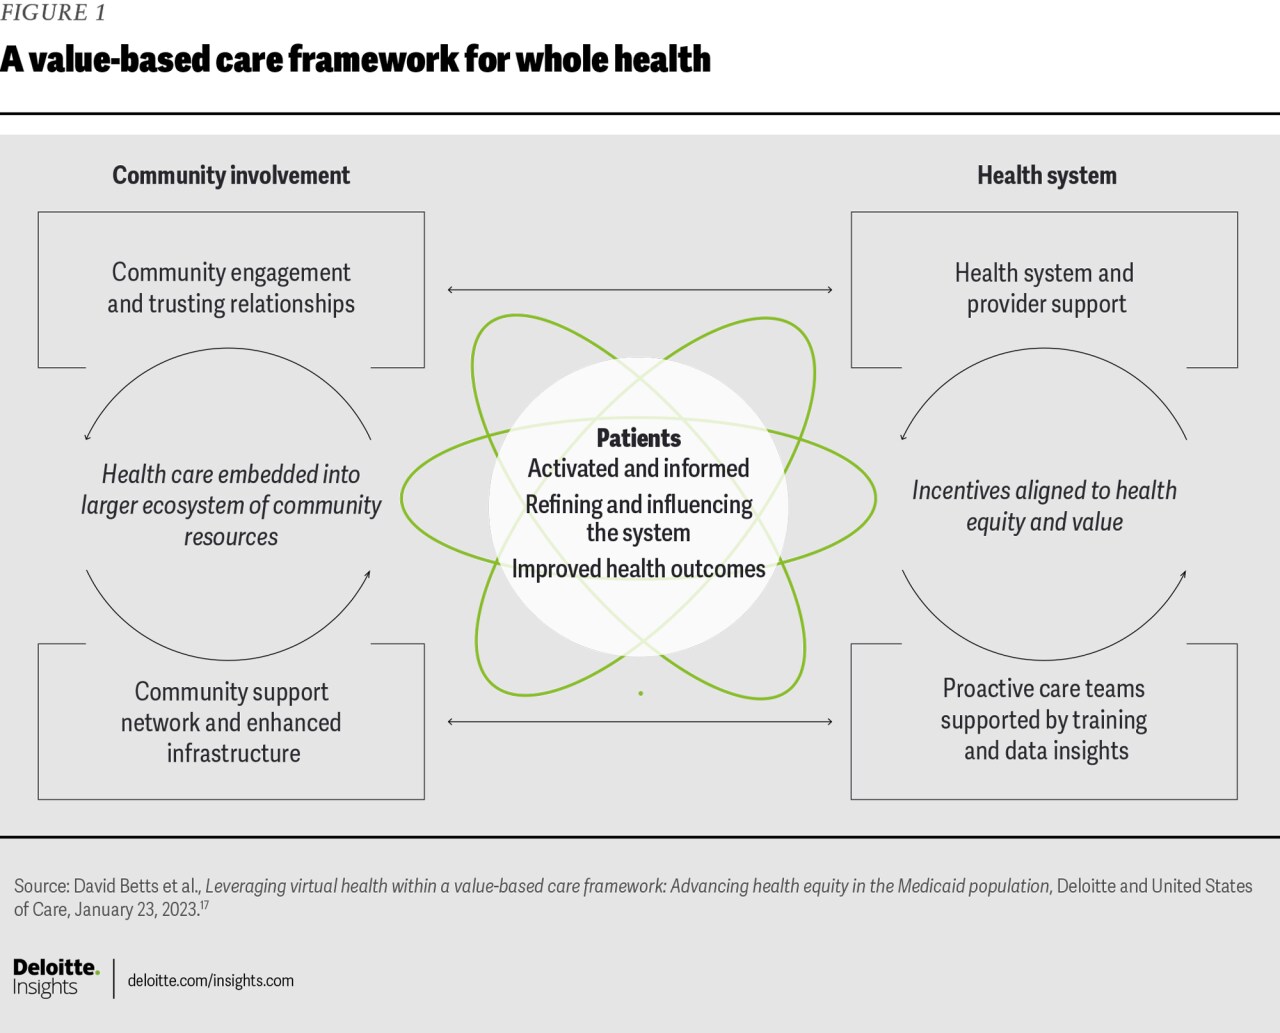 Figure 2. Exhibit 2—A value-based care framework for whole health